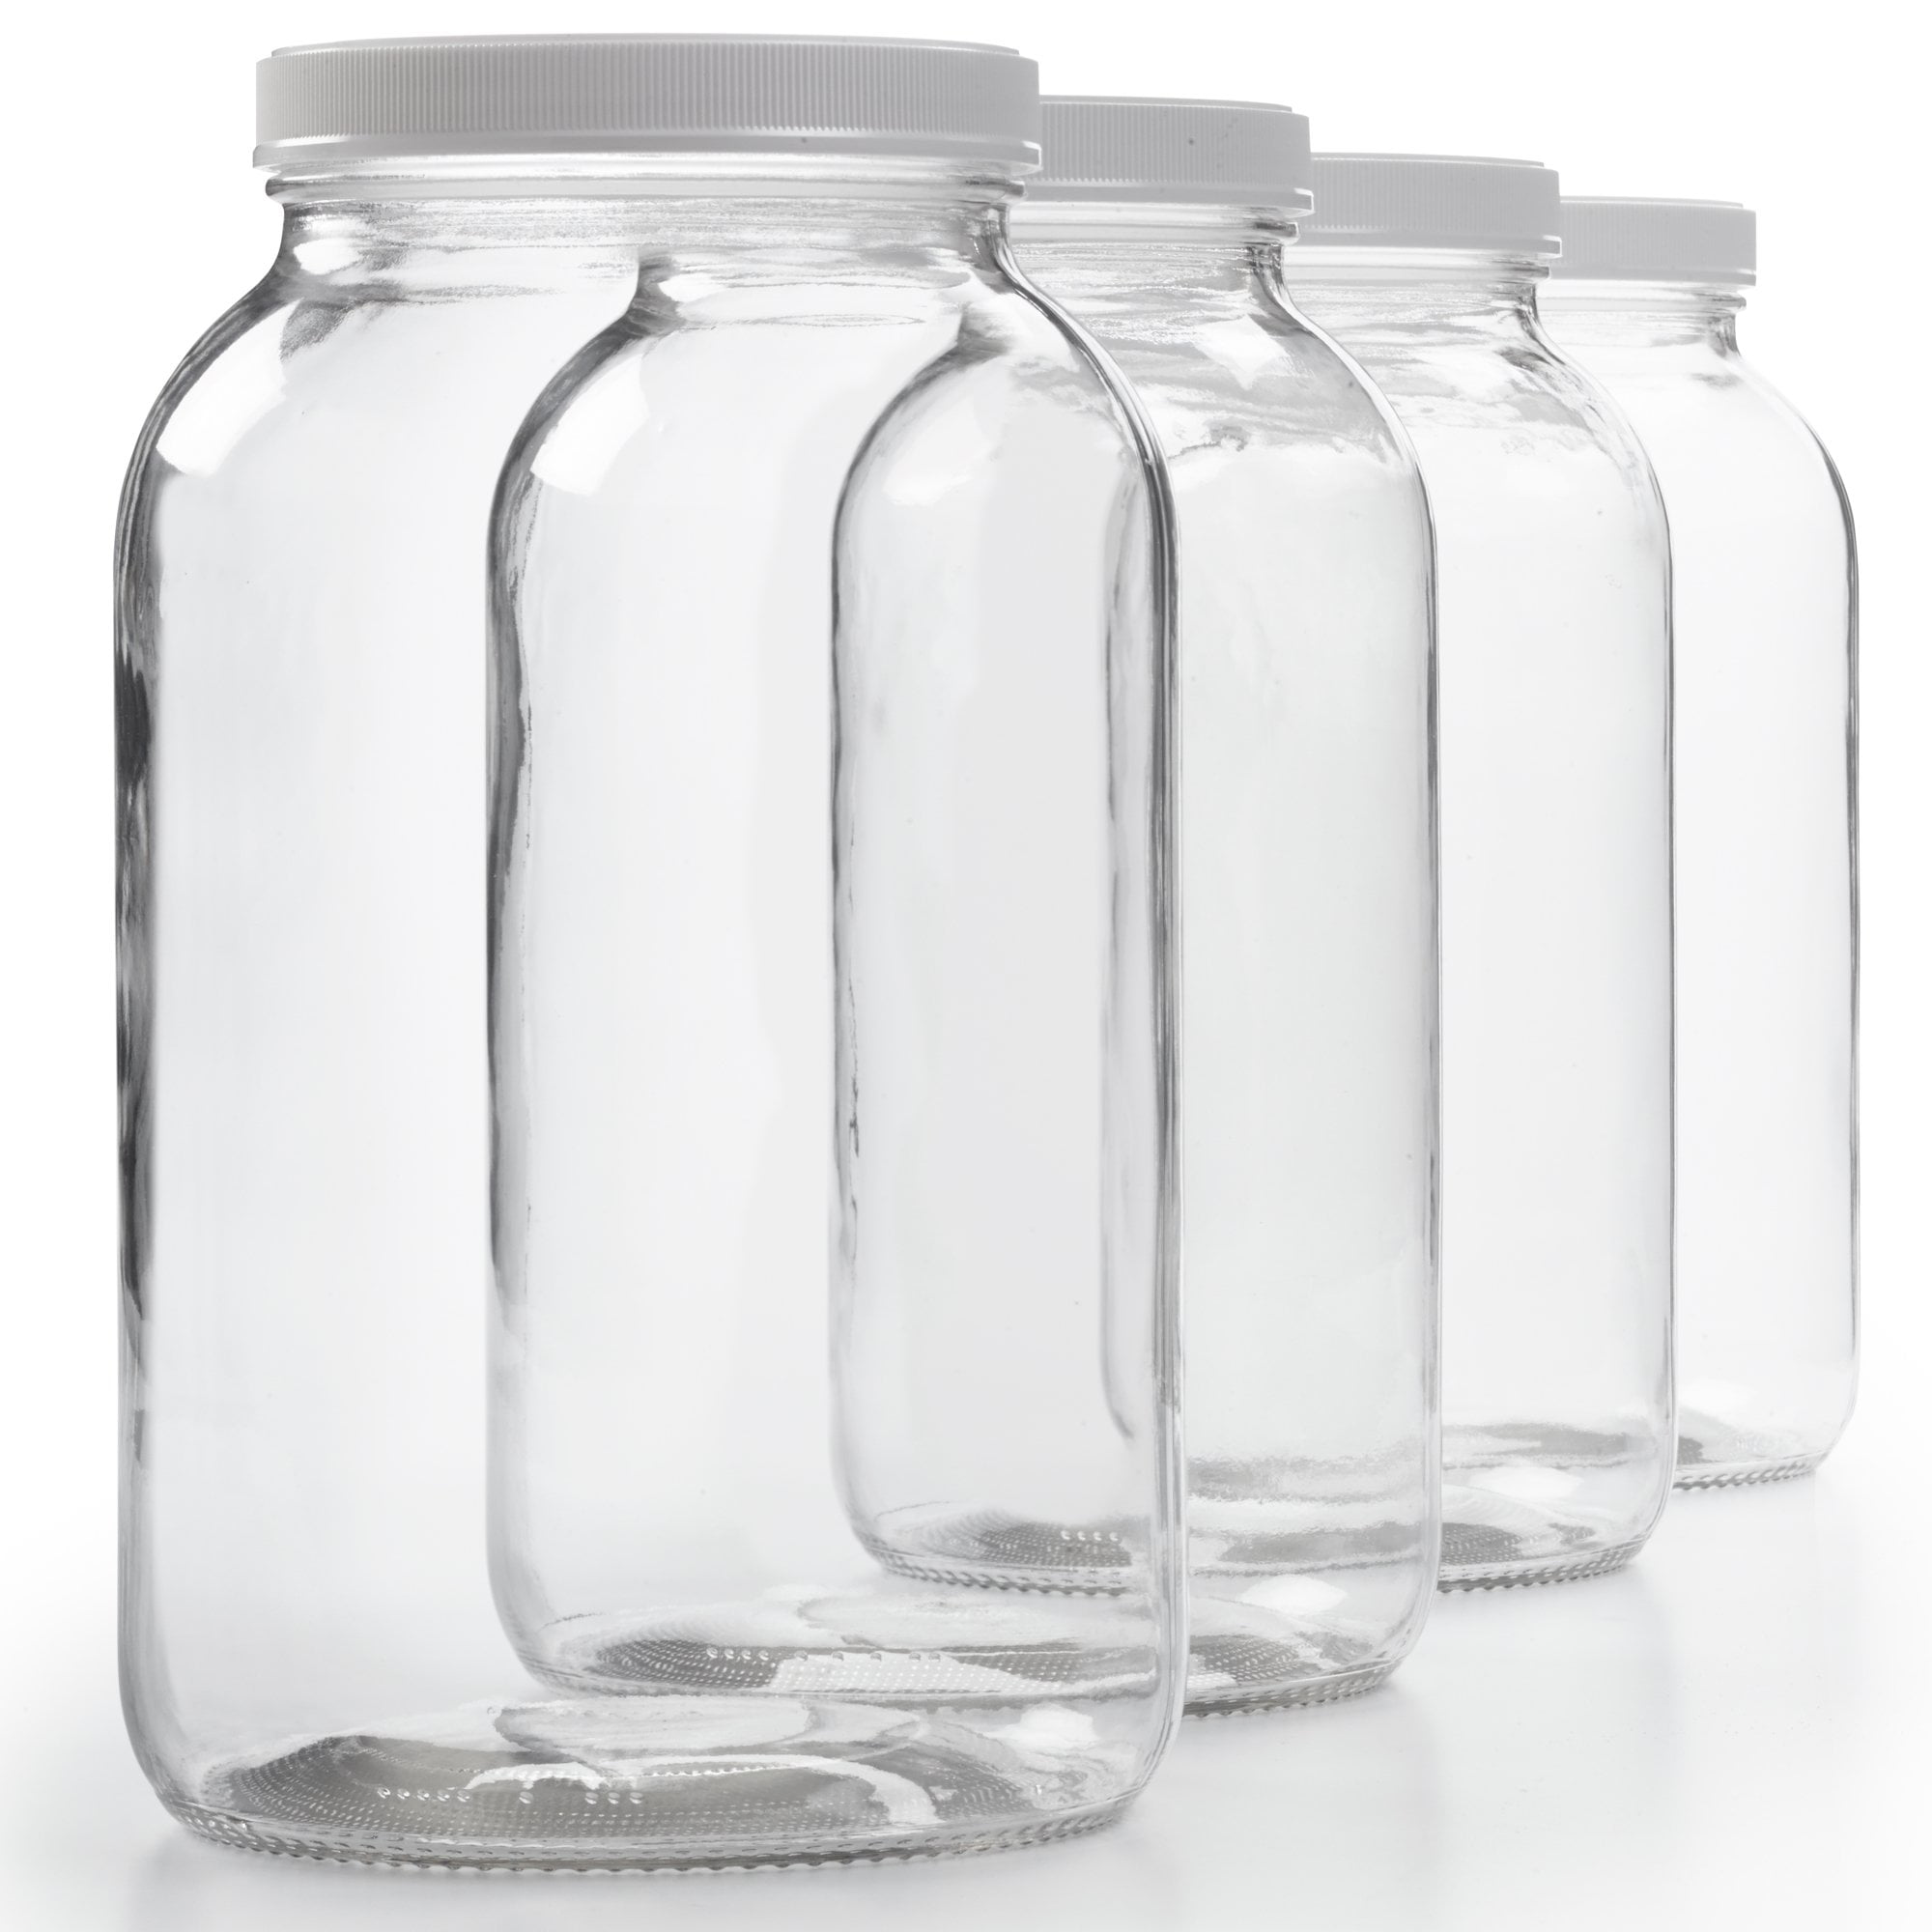 1 Gallon Glass Jar for Water with Lid and Pour Spout - Fits Mini